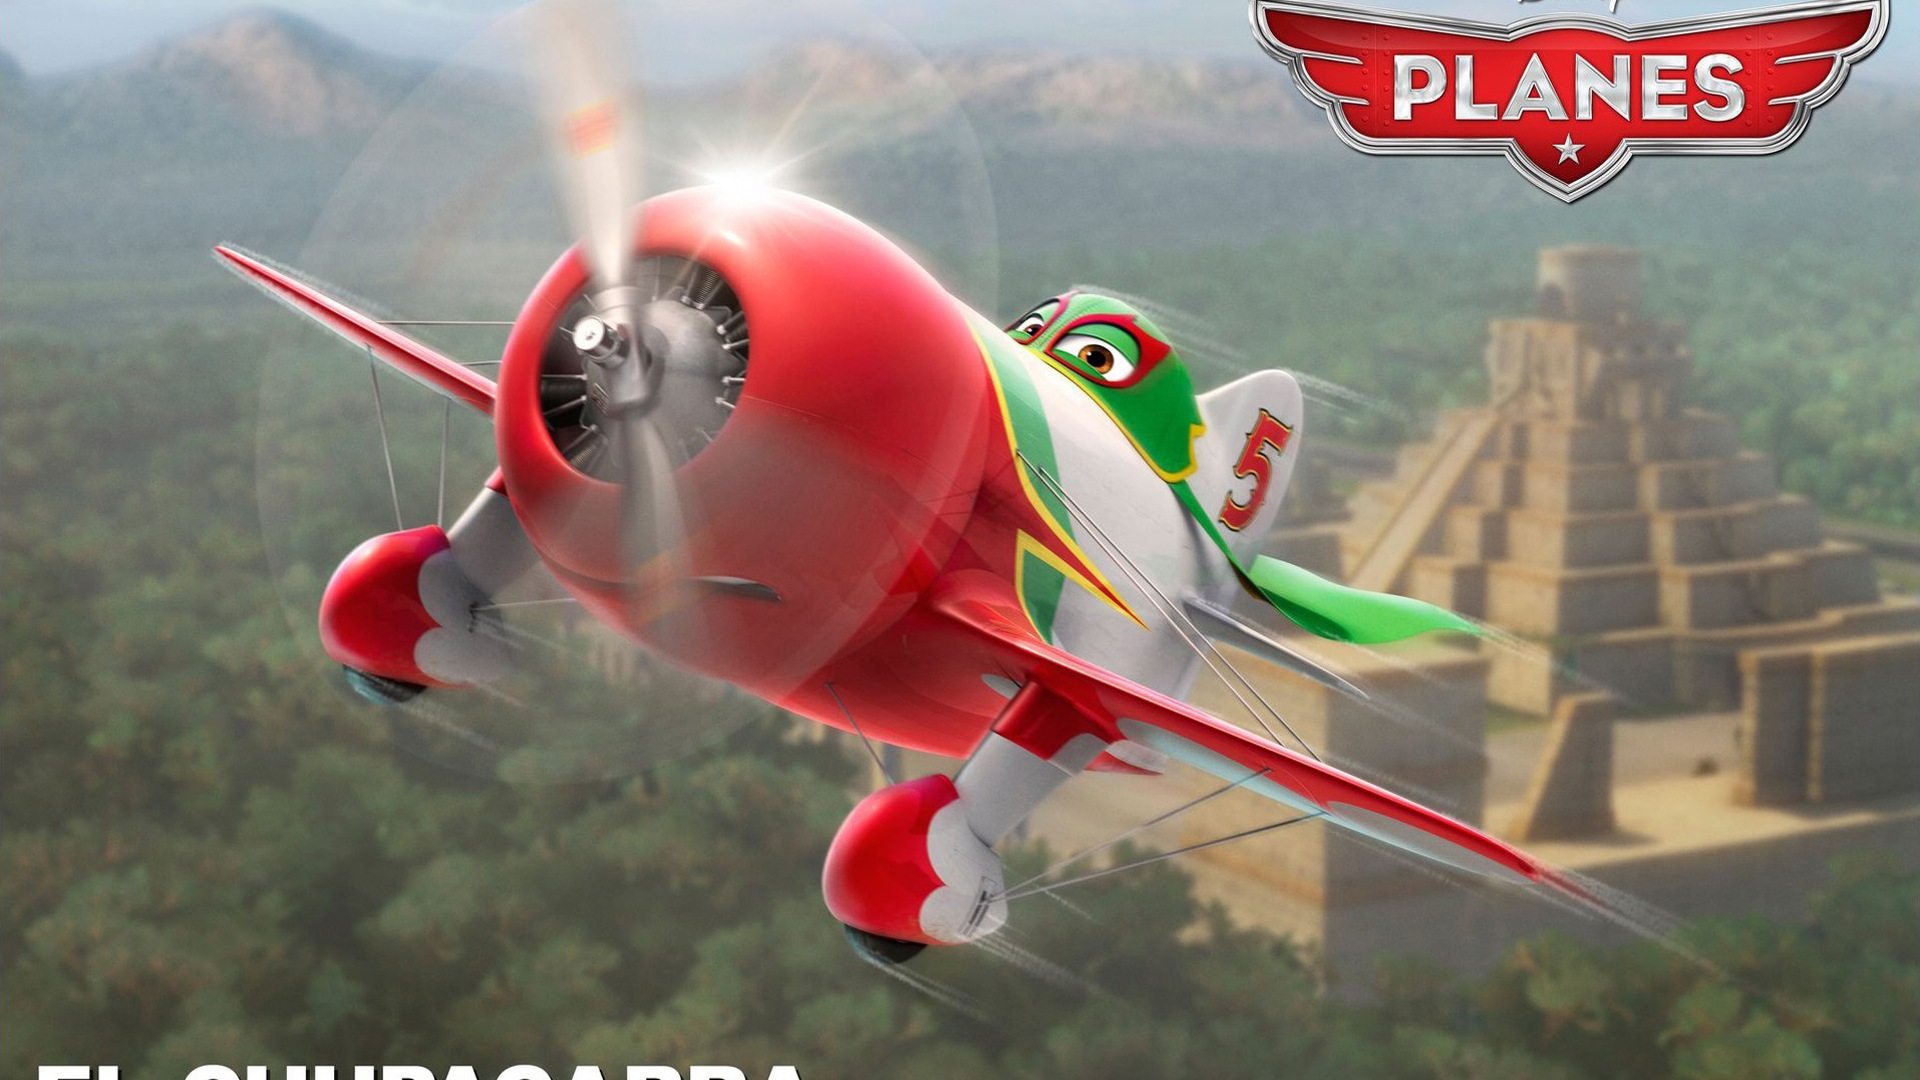 Planes 2013 HD wallpapers #17 - 1920x1080